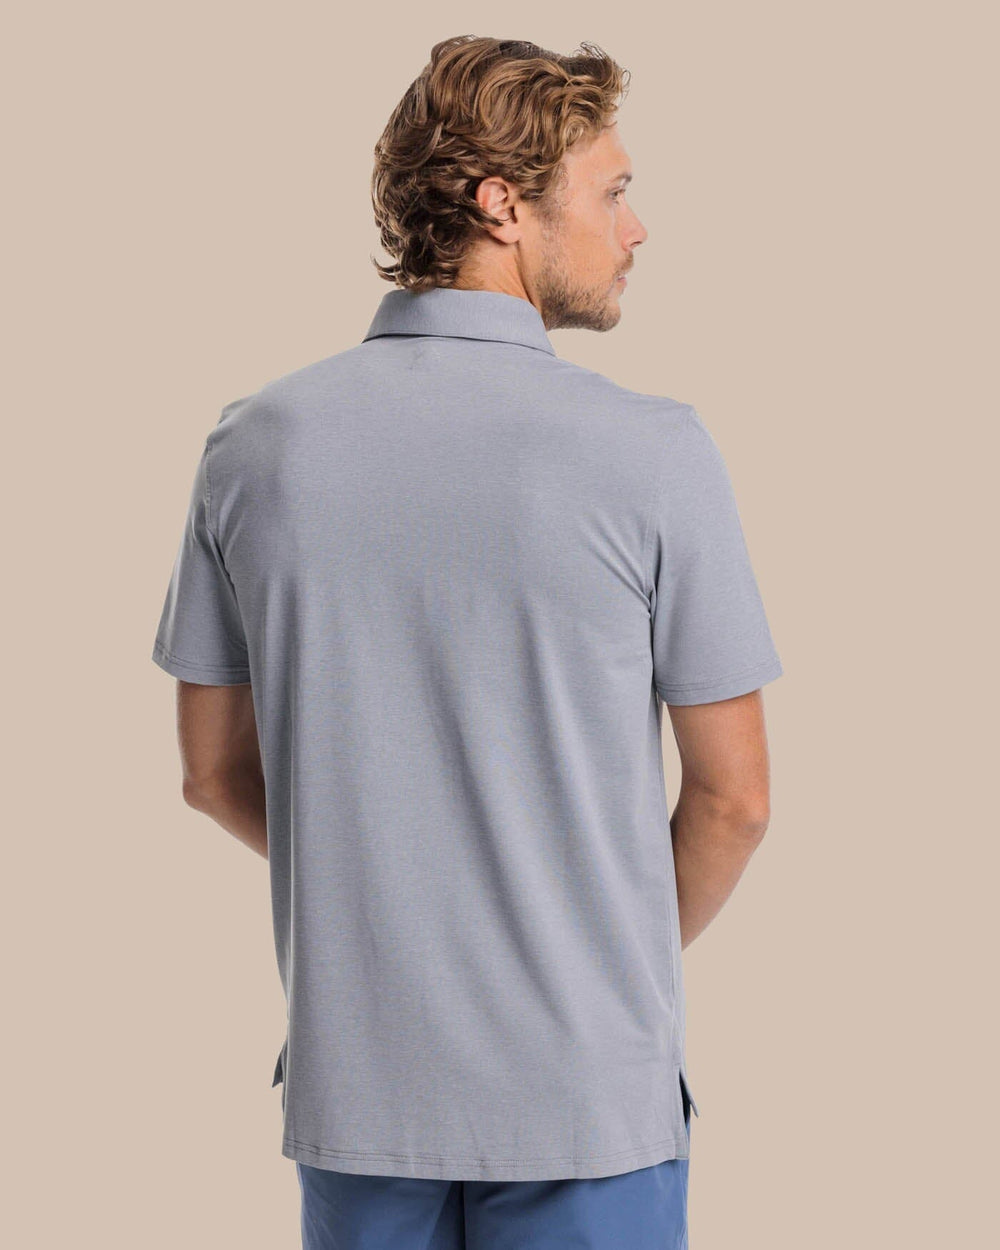 The back view of the brrr°®-eeze Heather Performance Polo Shirt by Southern Tide - Heather Steel Grey